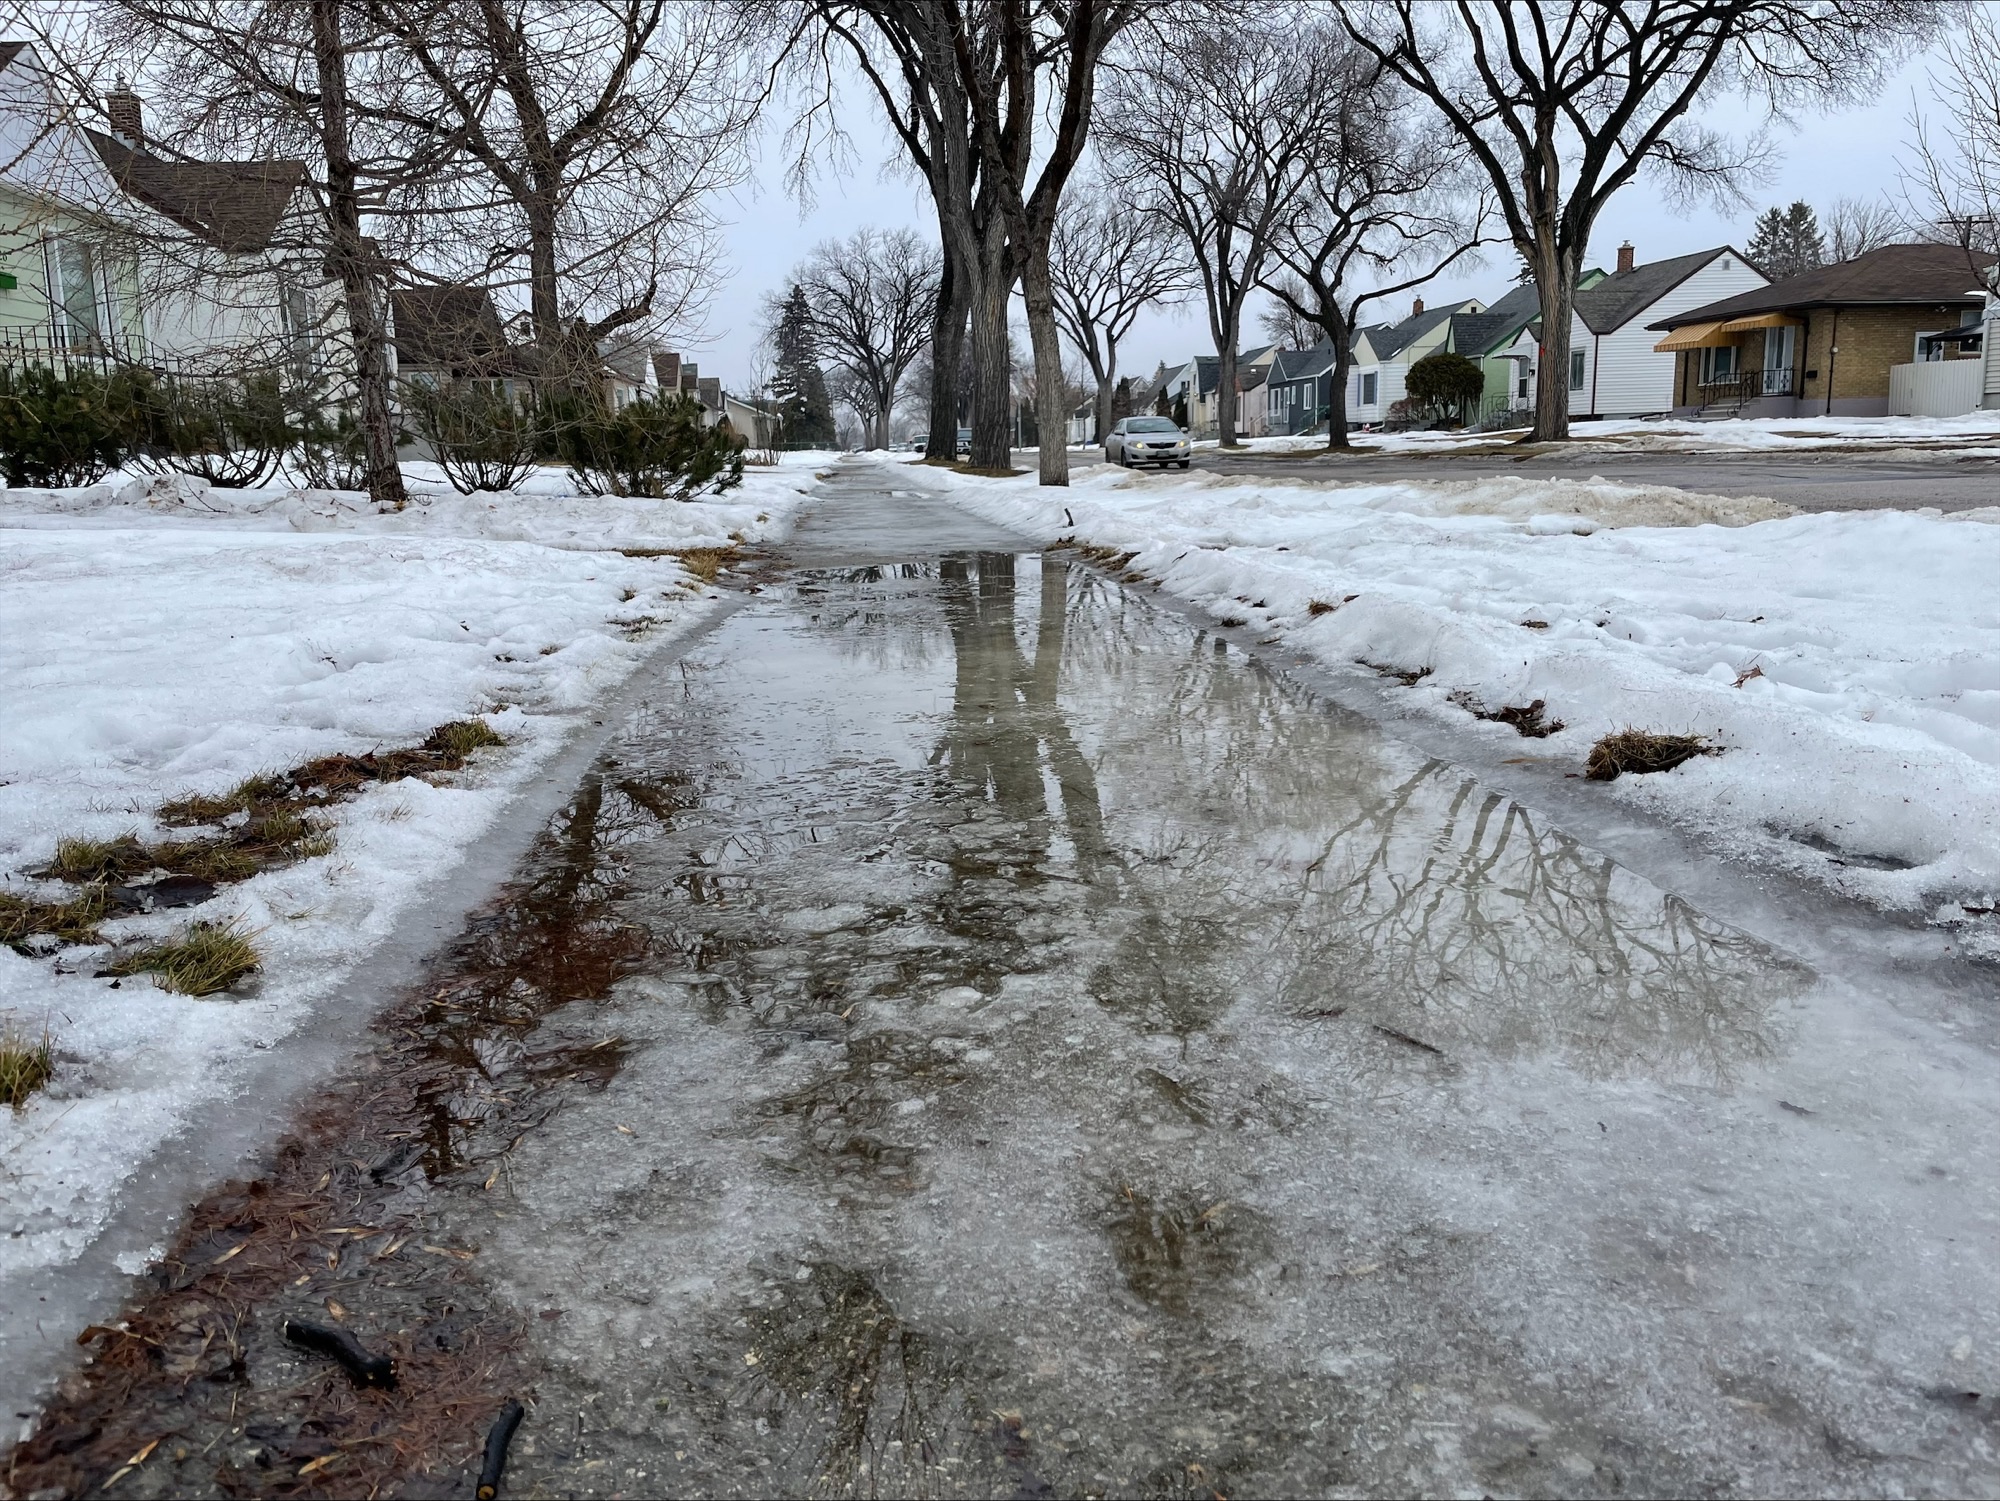 Water pools over an icy sidewalk on a residential road.